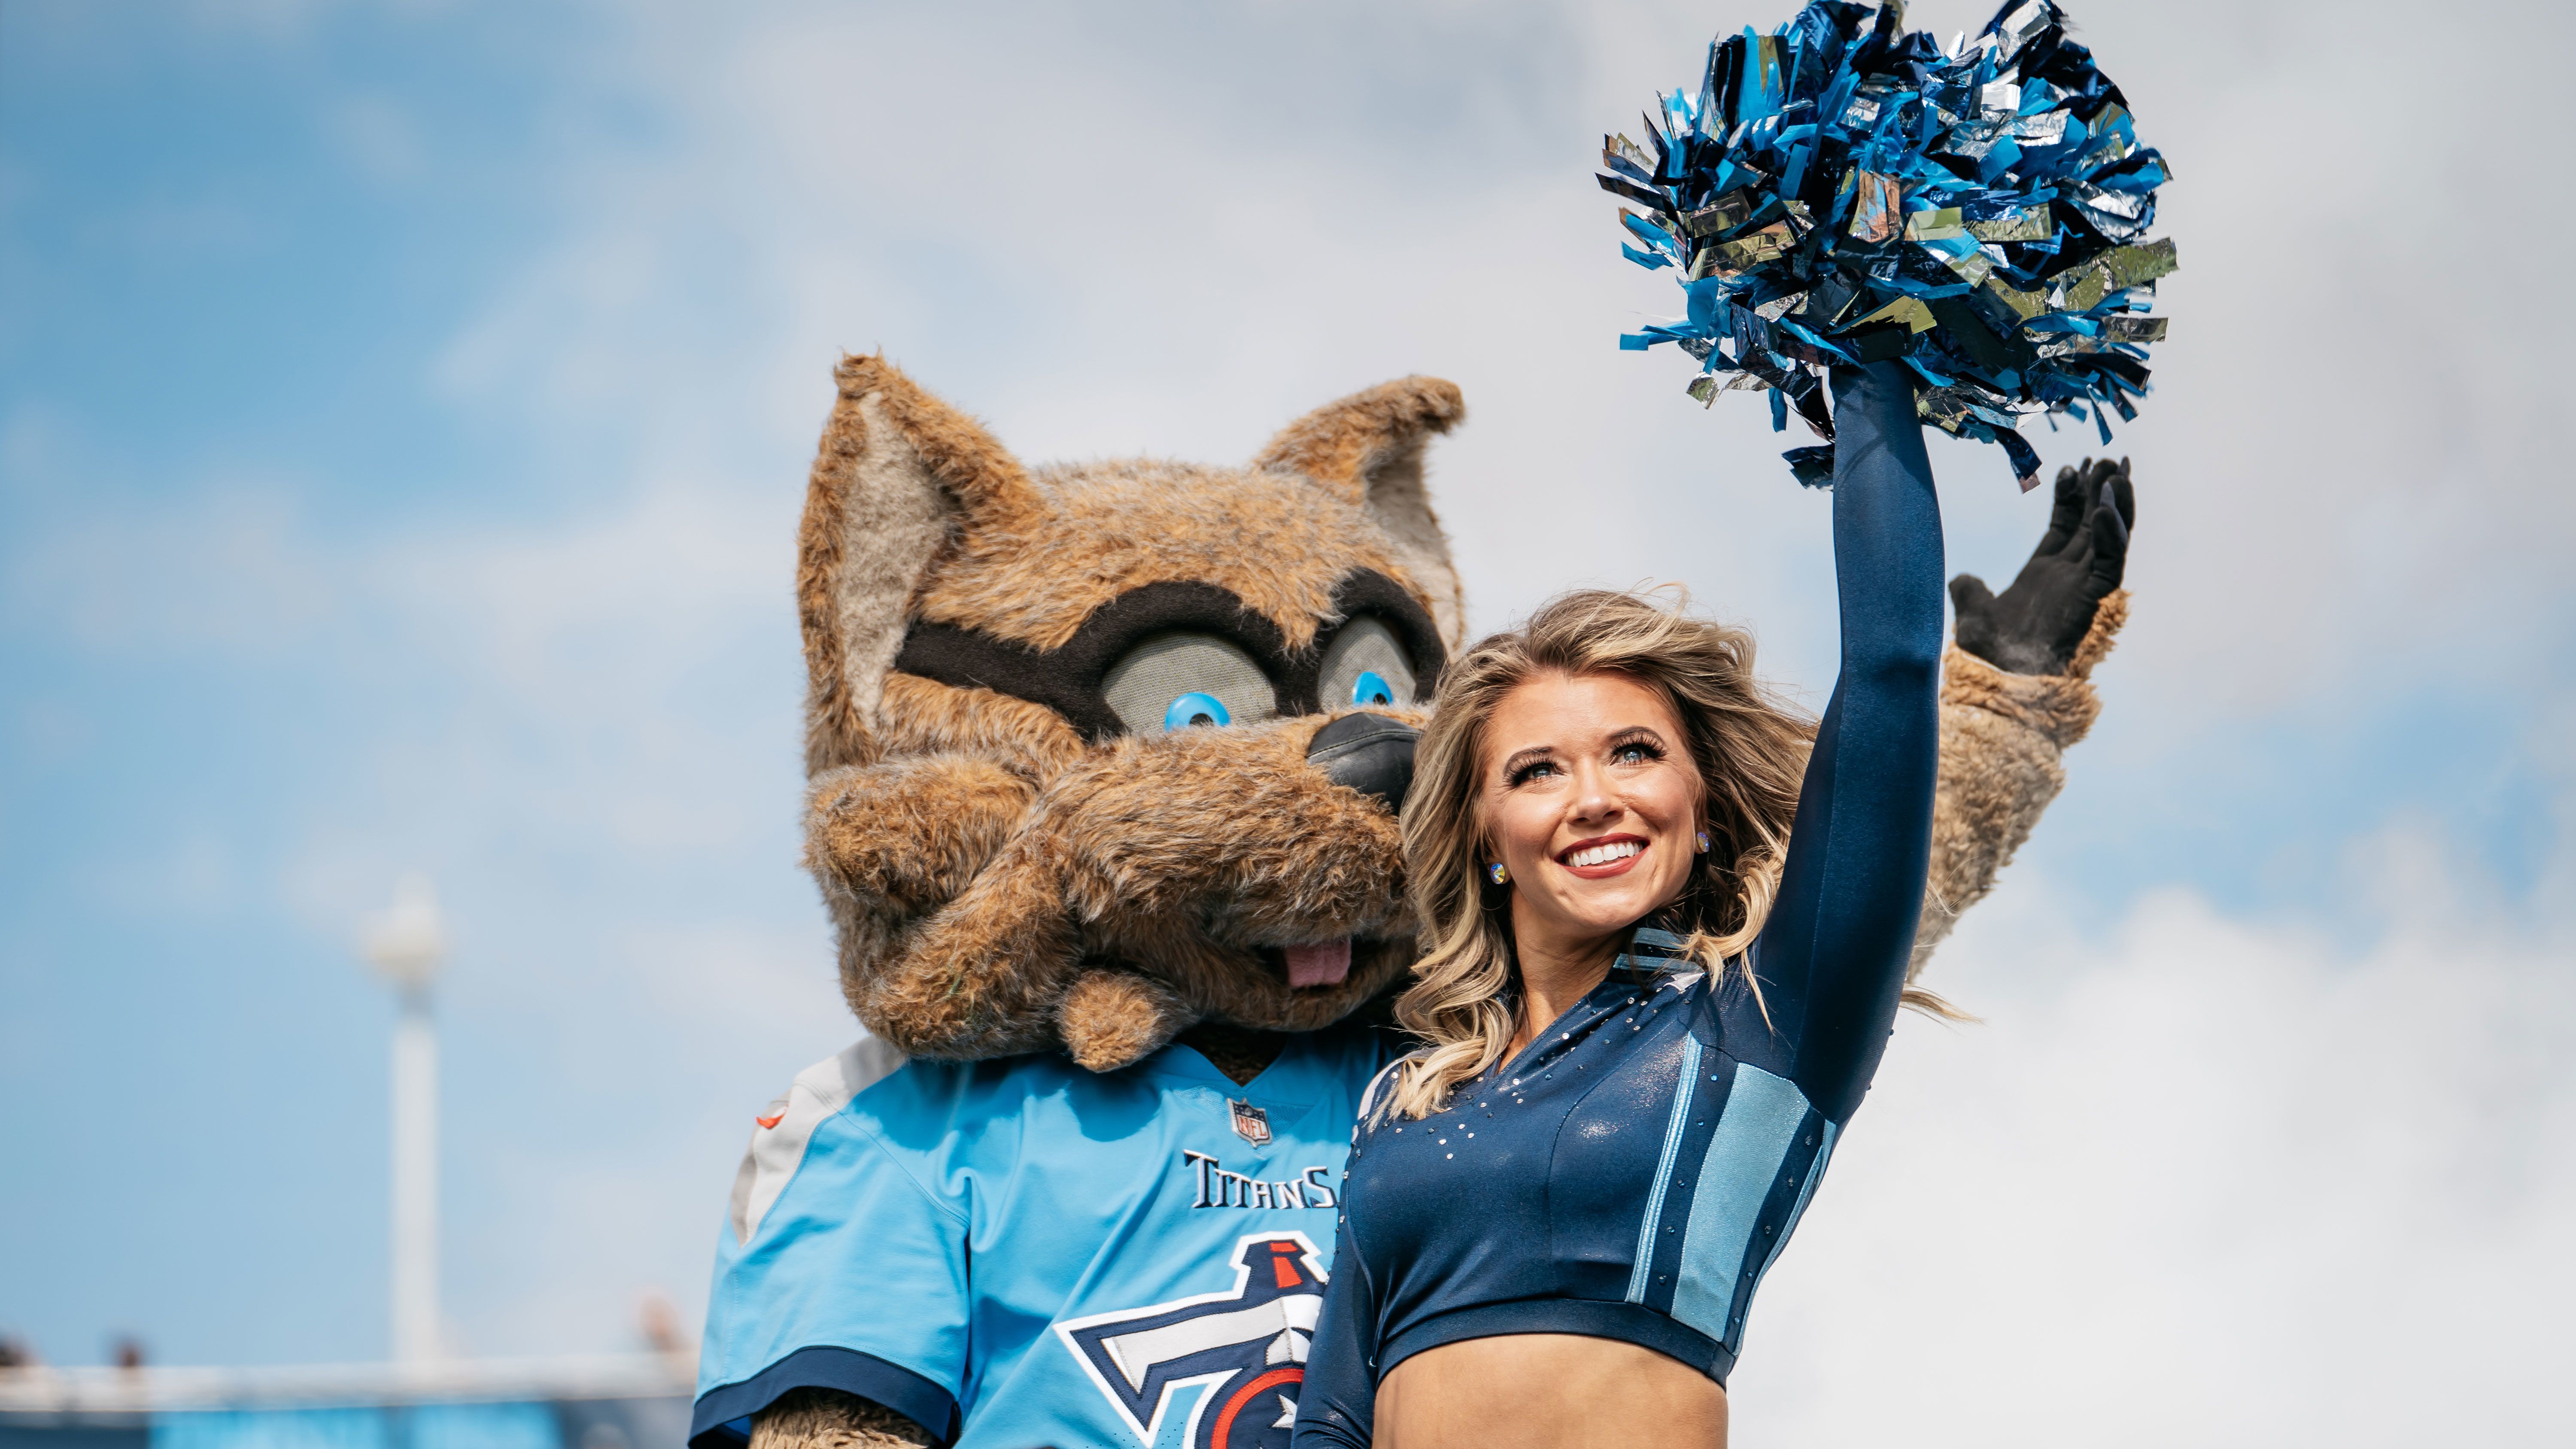 Tennessee Titans Mascot Made It To NBC Show The Titan Games - Sports  Illustrated Tennessee Titans News, Analysis and More